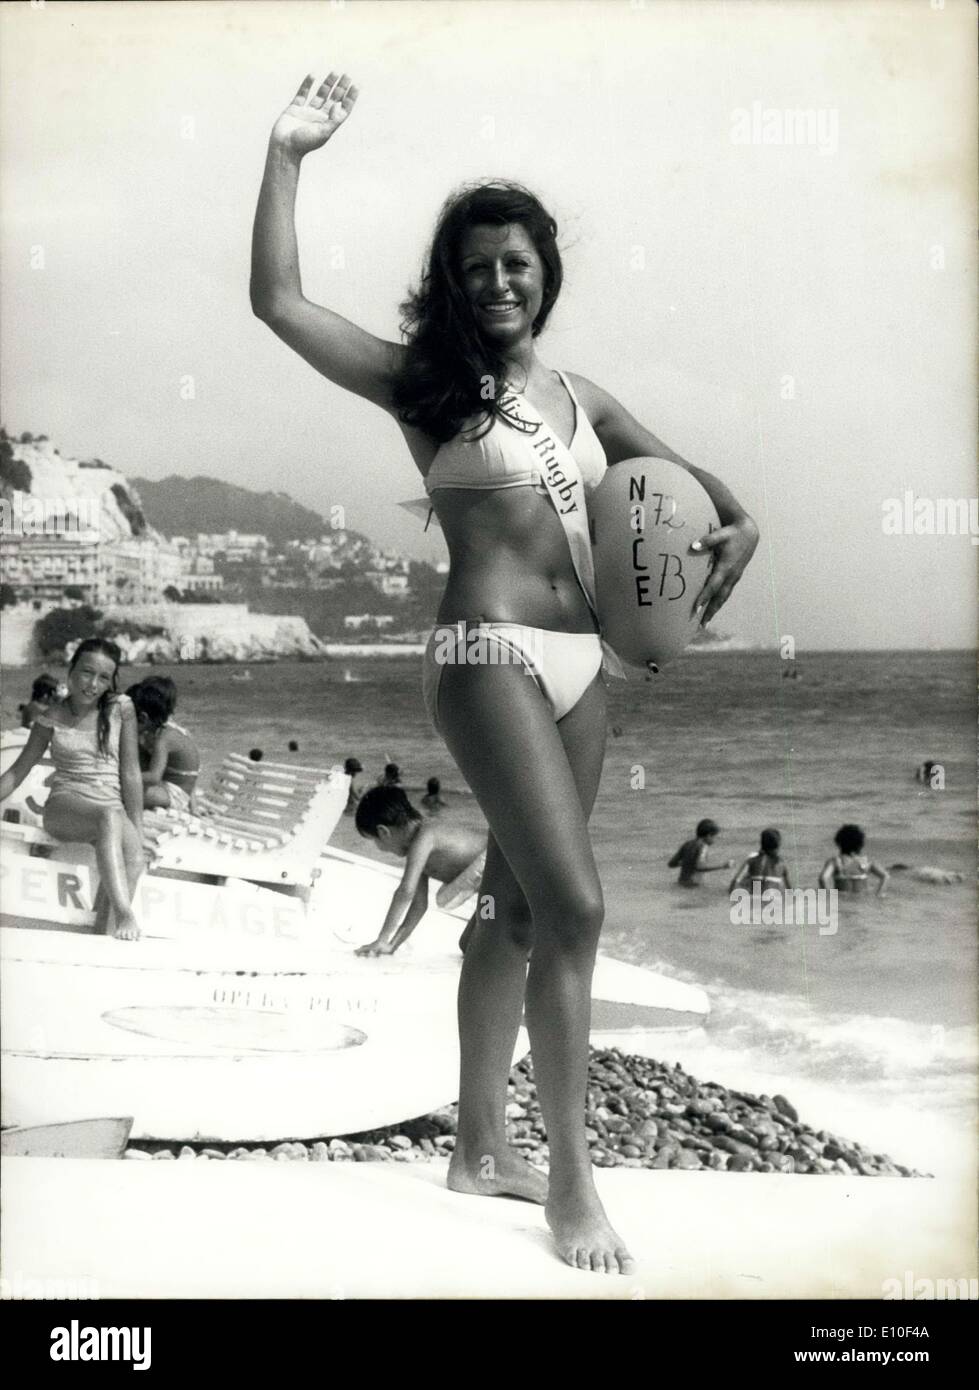 Aug. 29, 1972 - Meet Miss Rugby: 20-year old Sylvie Zucchini from nice was elected Miss Rugby 1972. Sylvie who is a tourists guide speaks 3 languages. Photo shows The new Miss Rugby pictured on the promenade Des Anglais Beach. Stock Photo